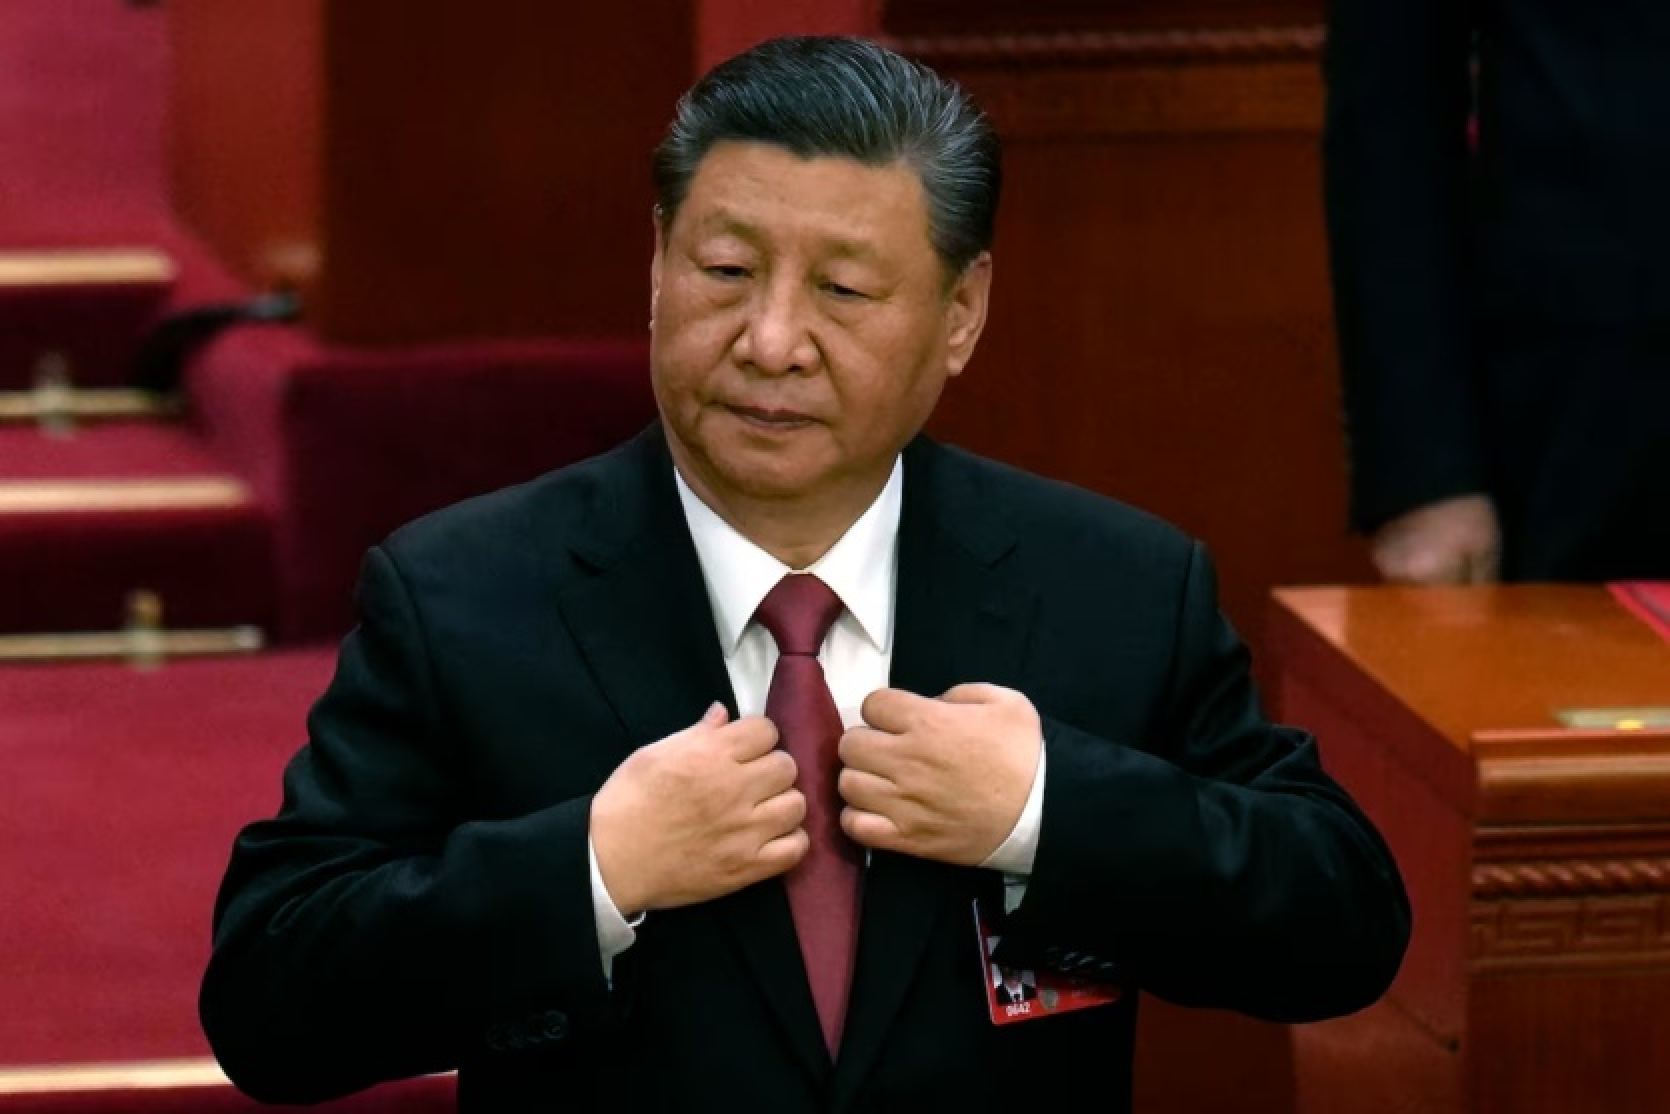 Xi Jinping on chip export restrictions: "No force in the world can stop China's technological progress"